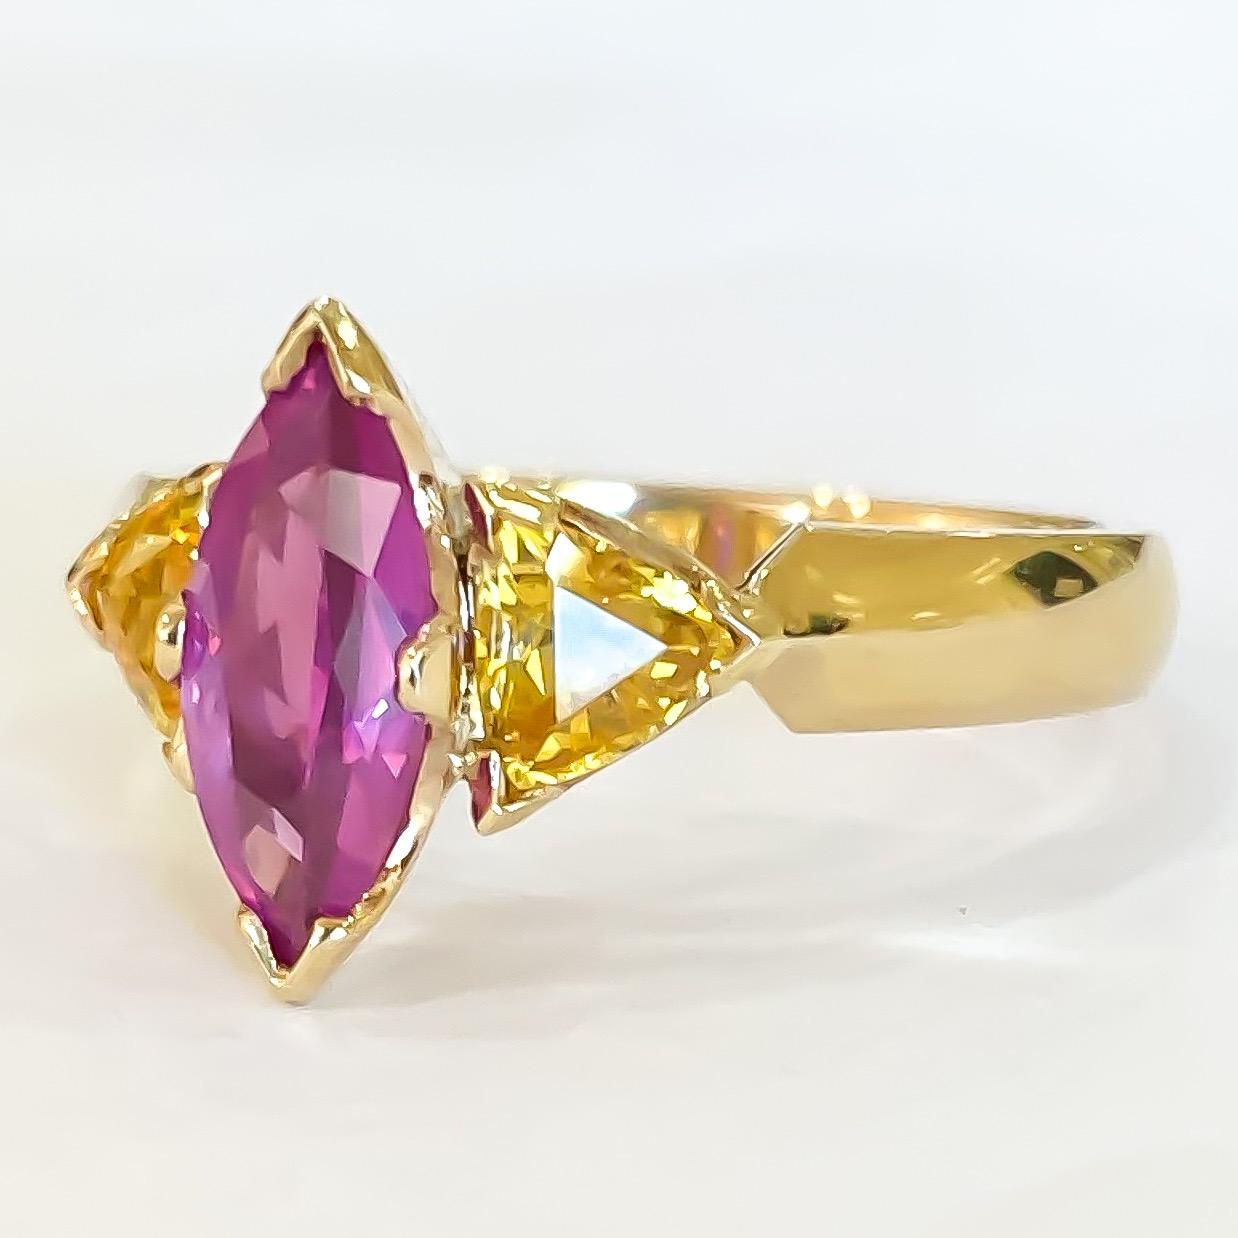 One of a kind custom handmade ring by Mark Areias Jewelers designed in 14 karat yellow gold. Set with one faceted marquise shape pink sapphire, flanked by two trillion golden sapphires. Handmade knife edge shank with chevron prongs. 

Center: